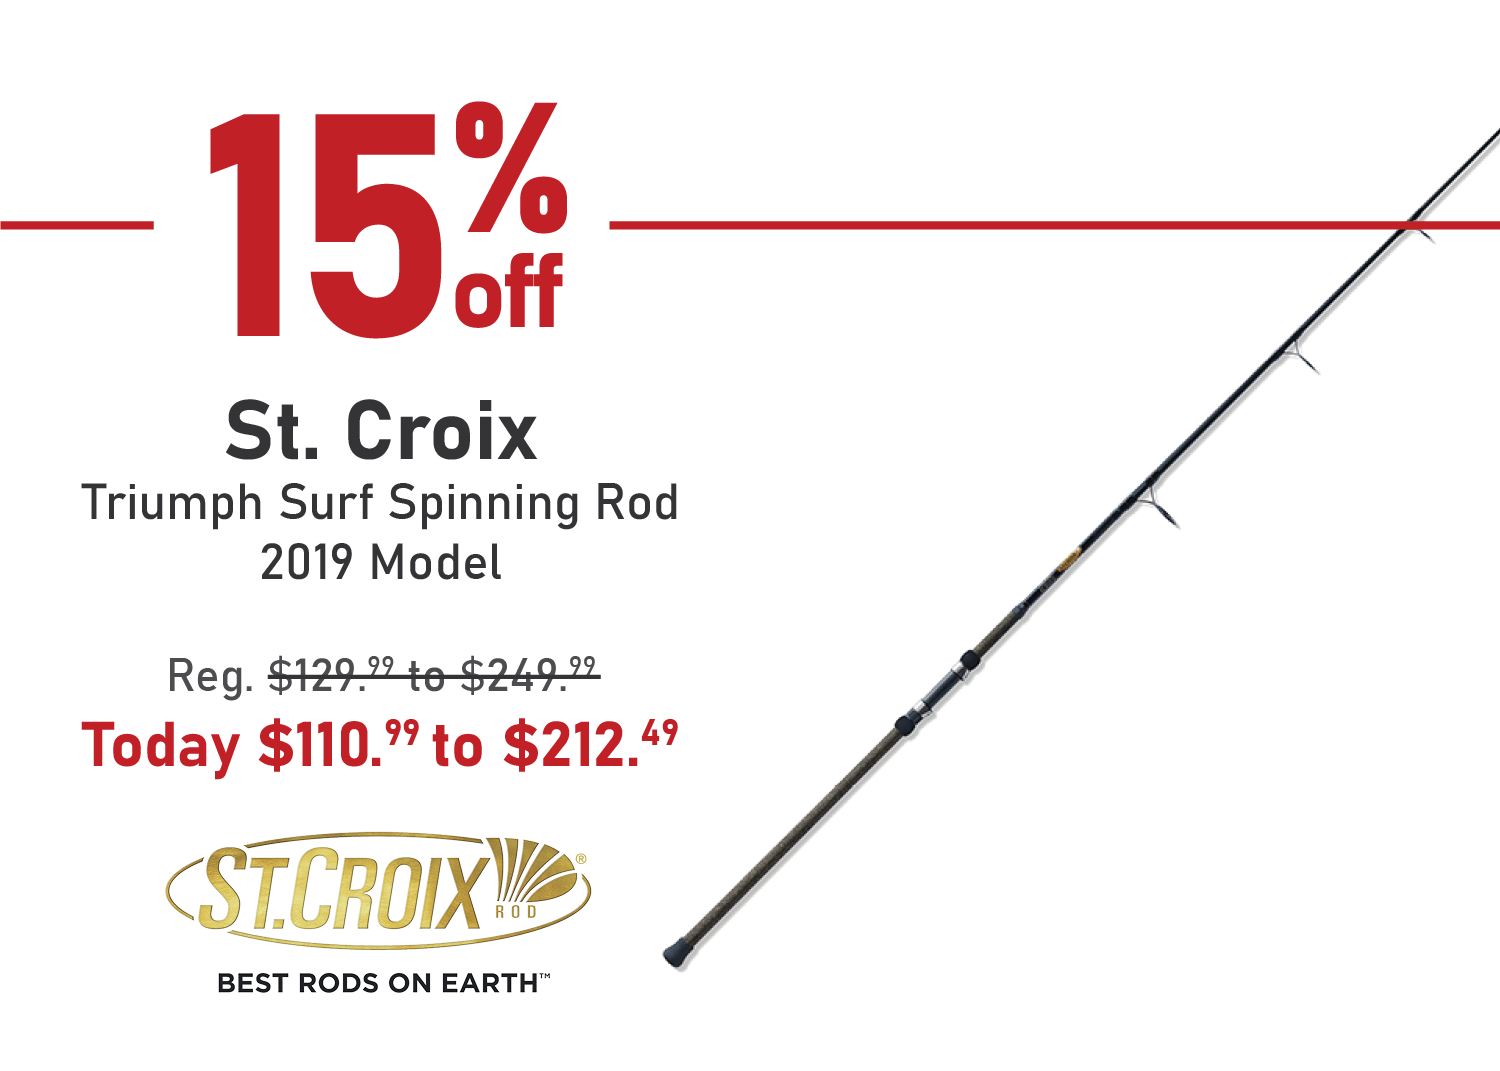 Take 15% off the St. Croix Triumph Surf Spinning Rod - 2019 Model